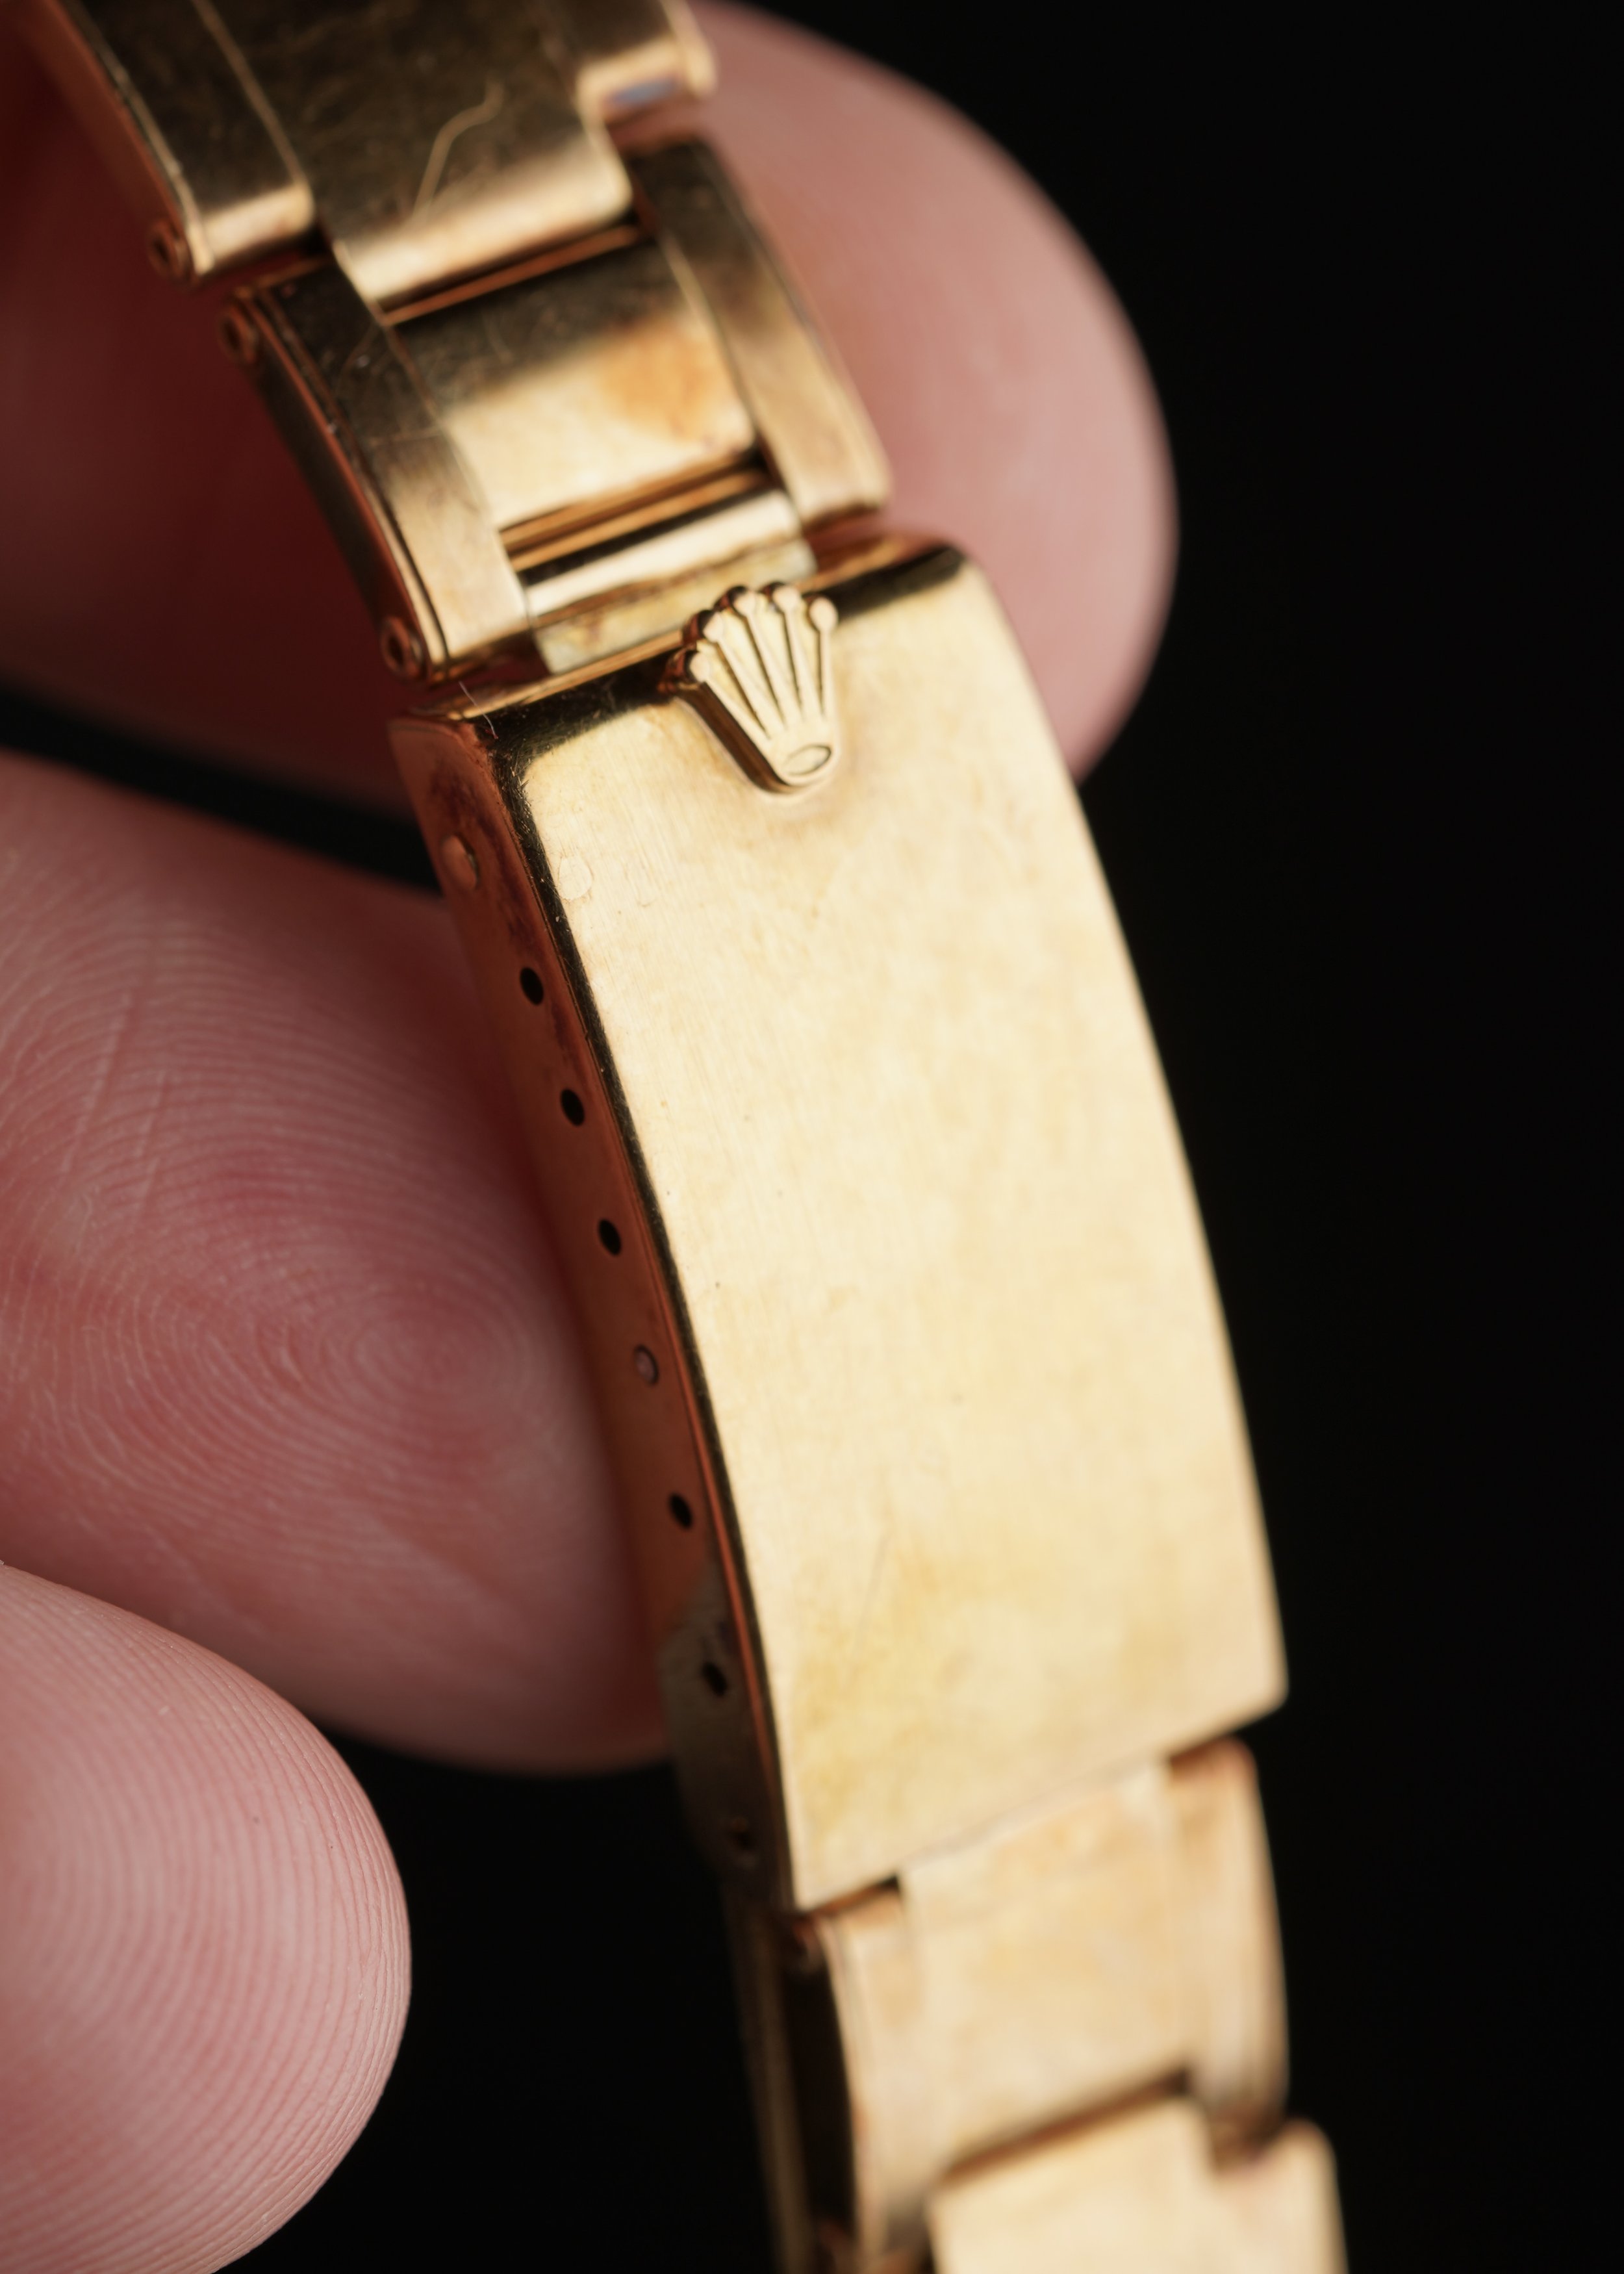 19mm Rolex Rivet 7205 Bracelet in 14K Yellow Gold From 1985 with 57 End Links 6.8 inches